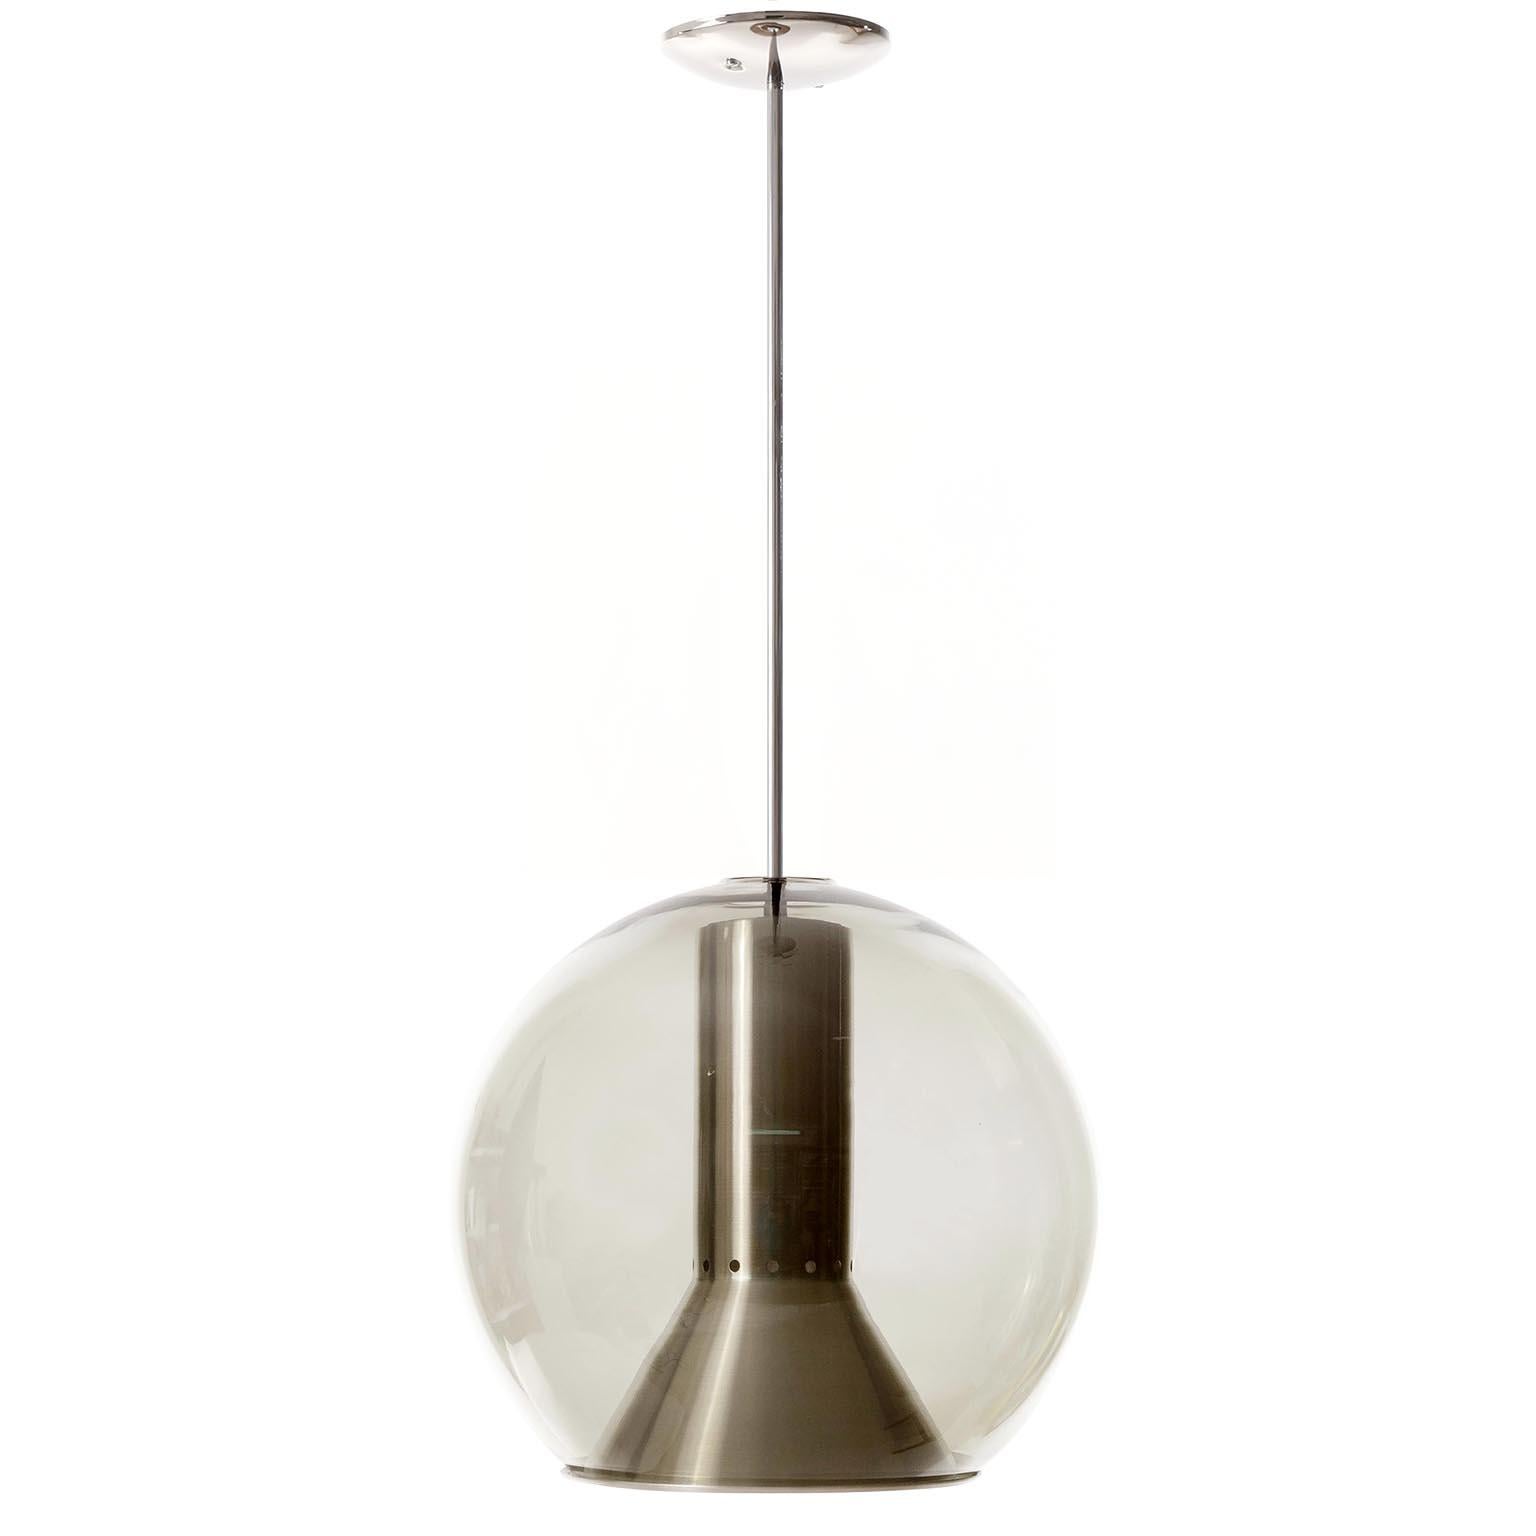 One of three pendant lights or hanging lamps designed by Frank Ligtelijn for RAAK Amsterdam, Netherlands, manufactured in midcentury, circa 1970 (late 1960 or ealry 1970s).
Each light features a grey smoked glass globe with an aluminium reflector